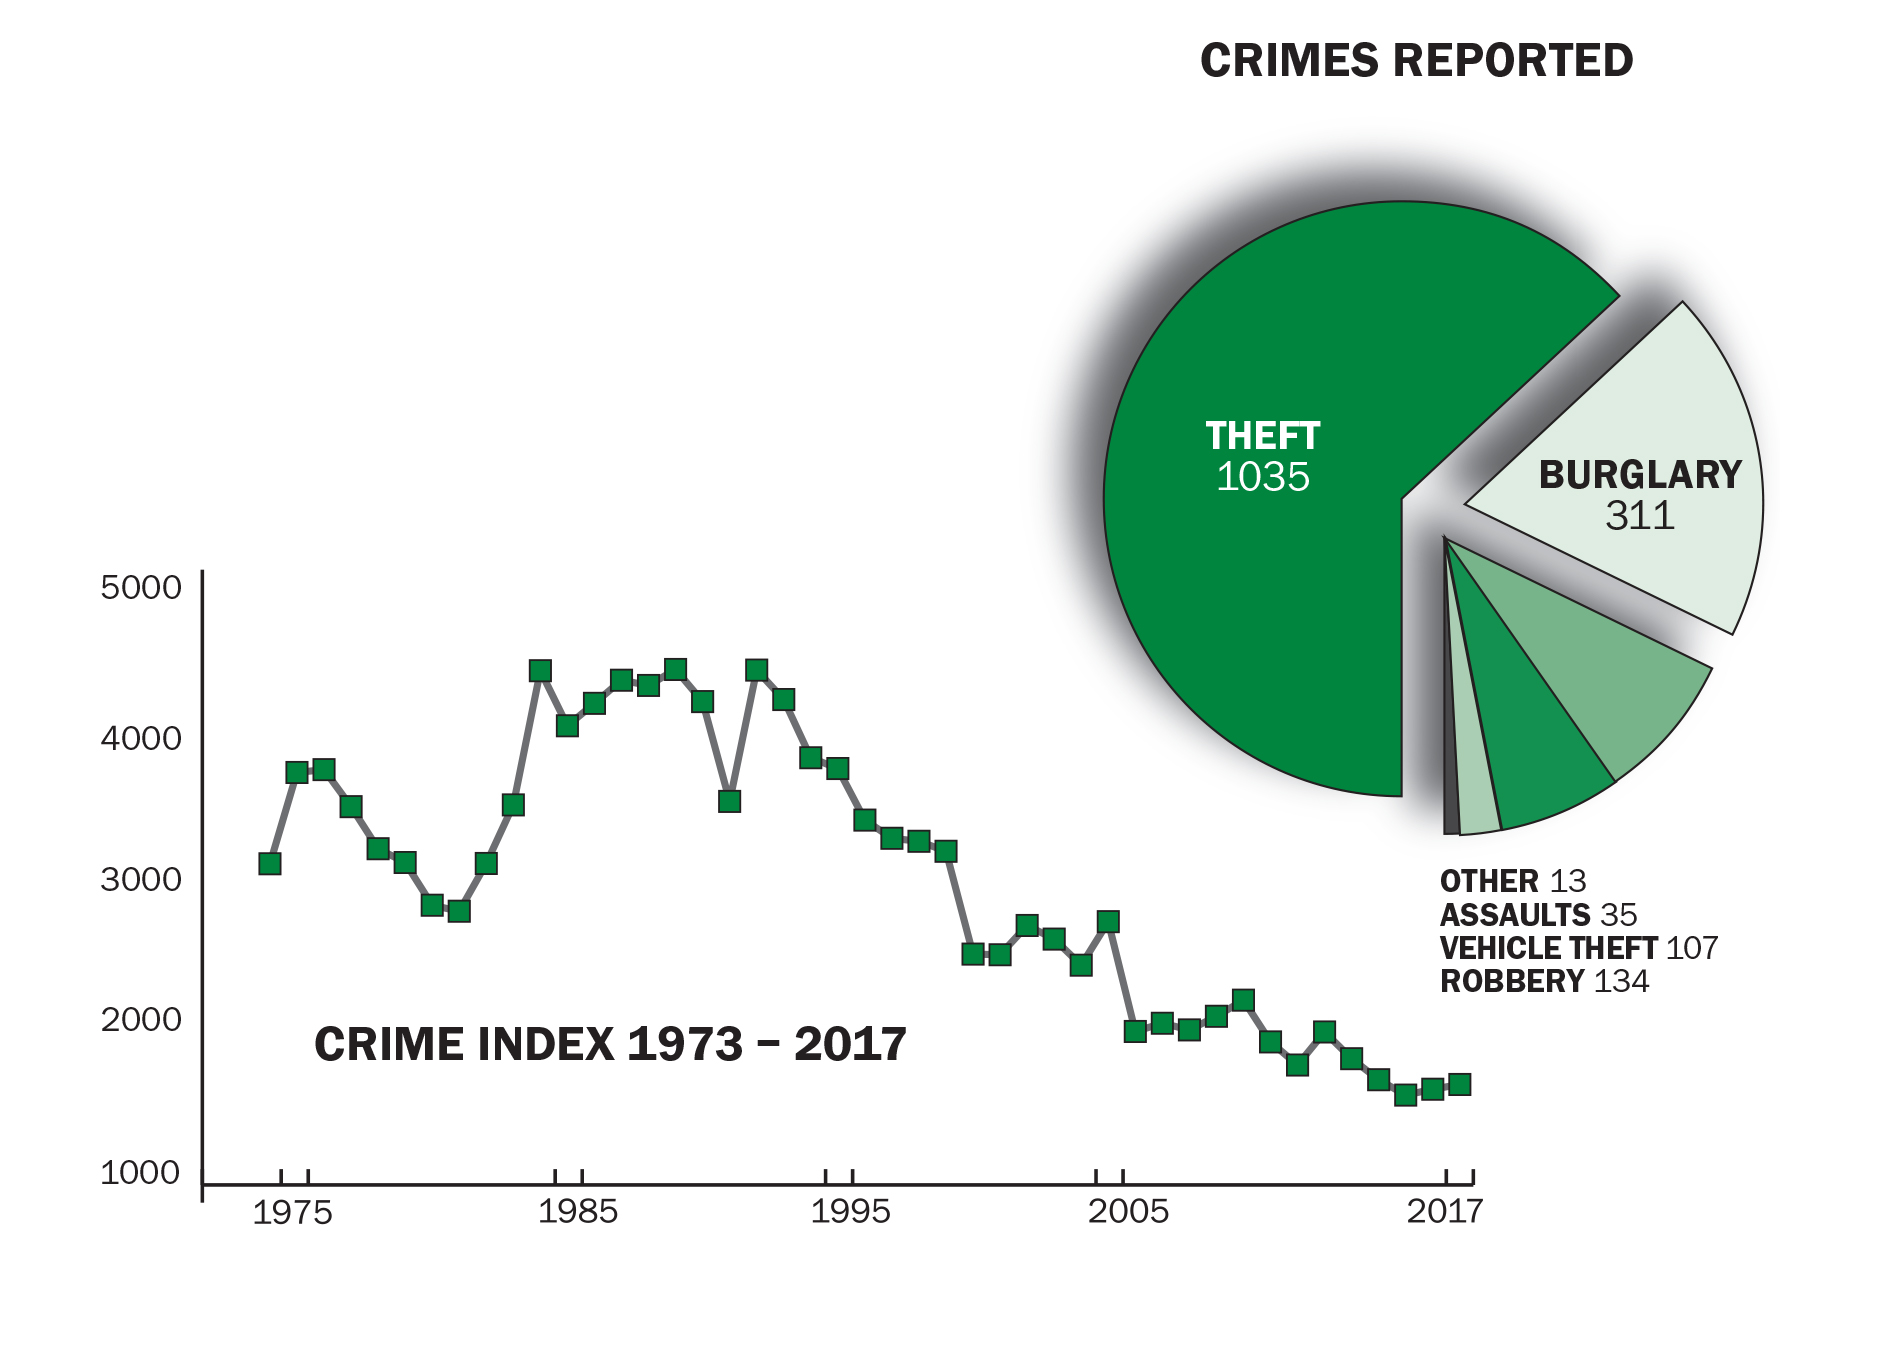 Chart depicting crime by category and over multiple years